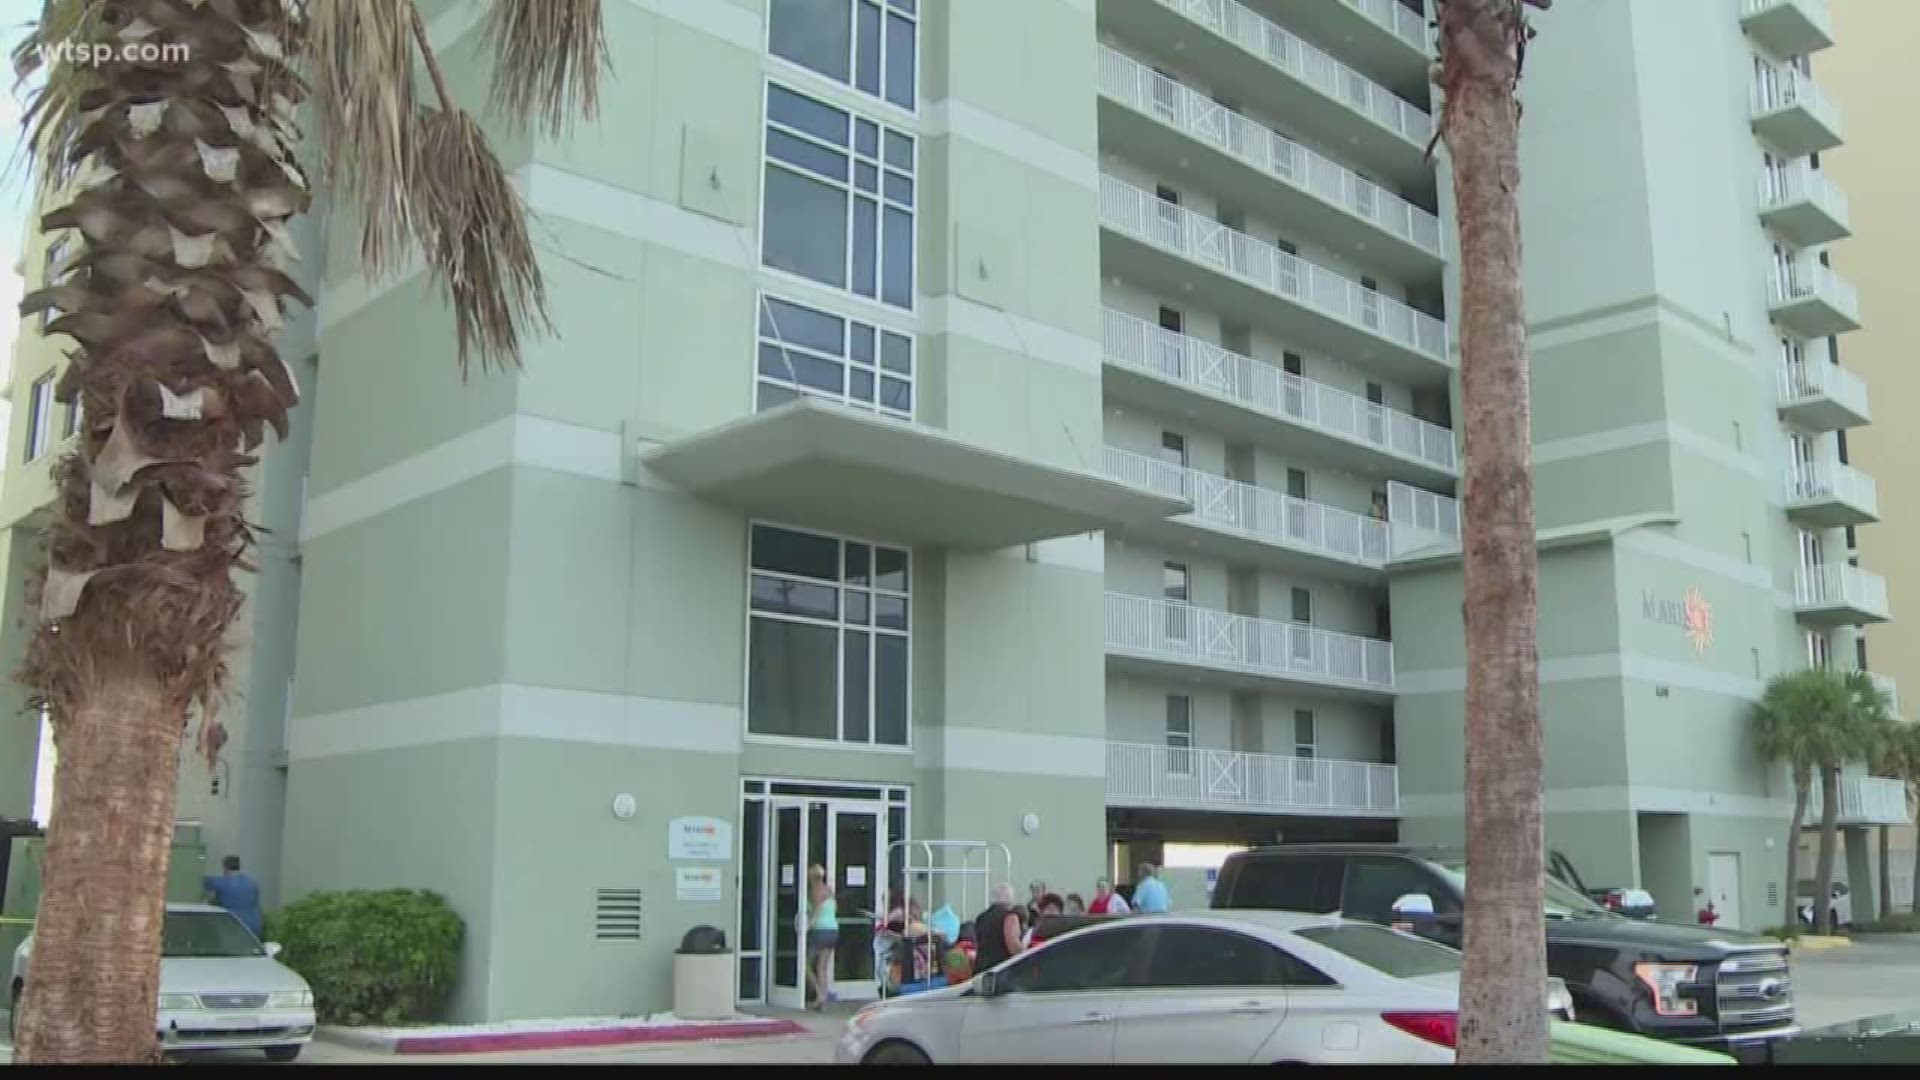 Authorities say a 3-year-old boy fell nine stories from a condominium balcony in the Florida Panhandle and later died.

Television station WJHG reports that the boy was rushed to a nearby hospital where he was pronounced dead Saturday after falling from the ninth floor of a condominium building in Panama City Beach.

Panama City Beach Police Department officials tell WJHG that the boy was visiting with his family from Midway, Ohio. The boy's identity wasn't immediately released.